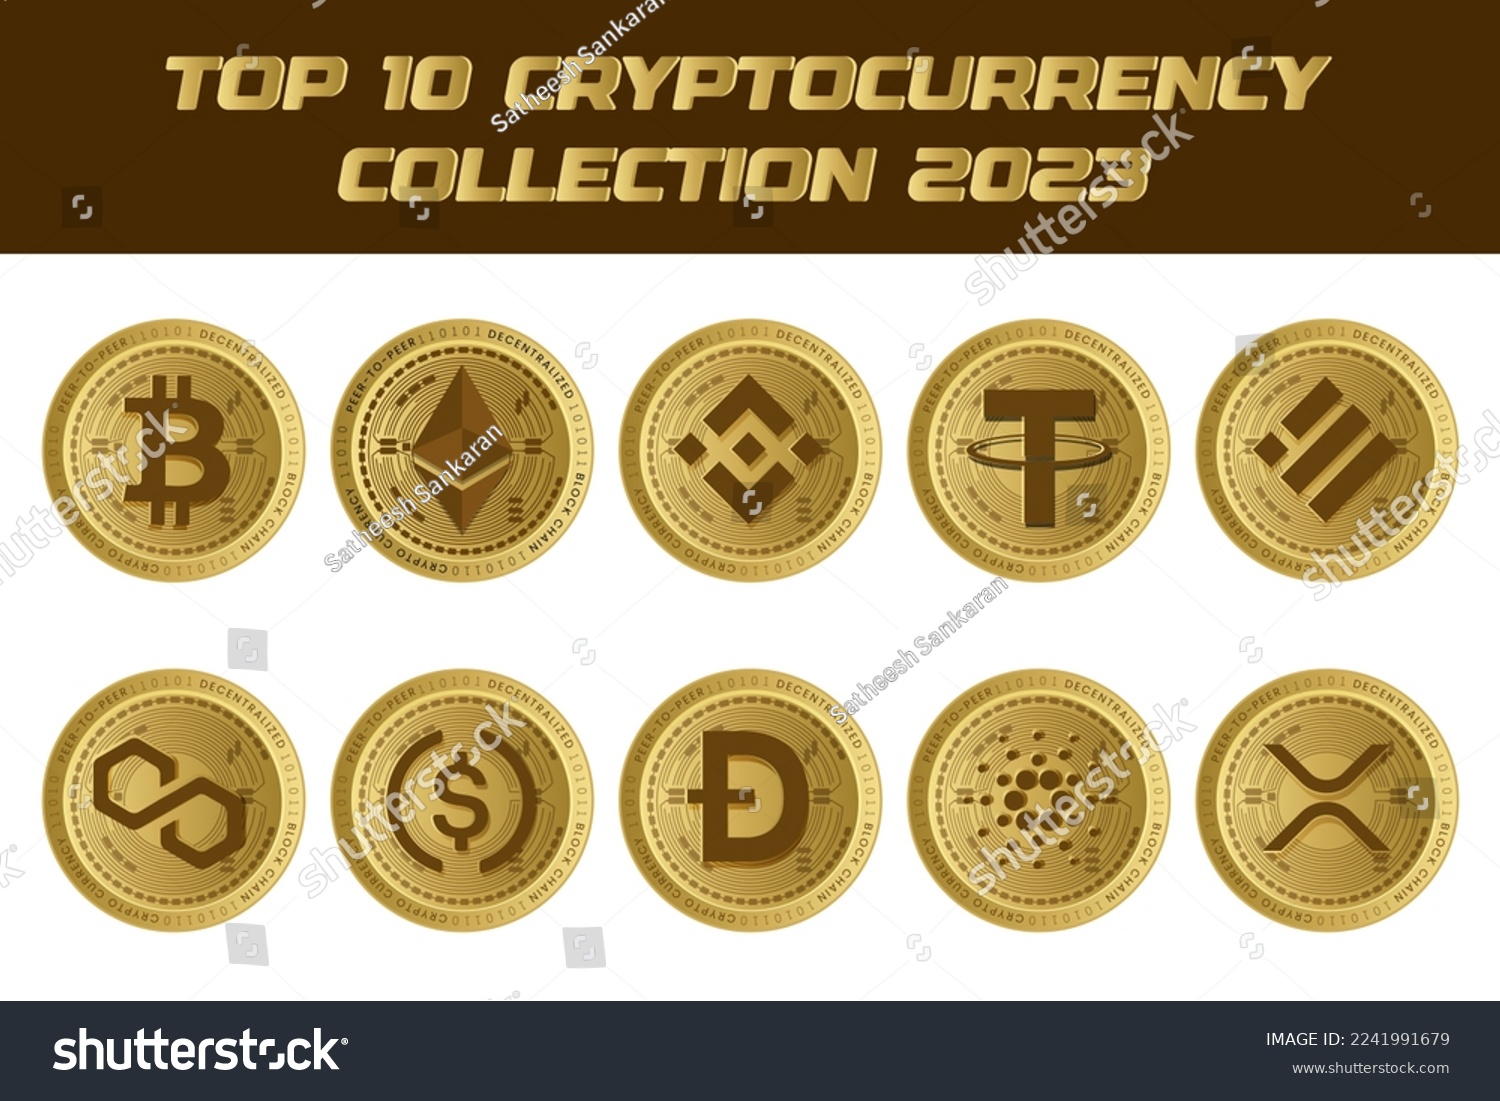 SVG of Top 10 cryptocurrency collection for 2023. Crypto logo coin set vector svg